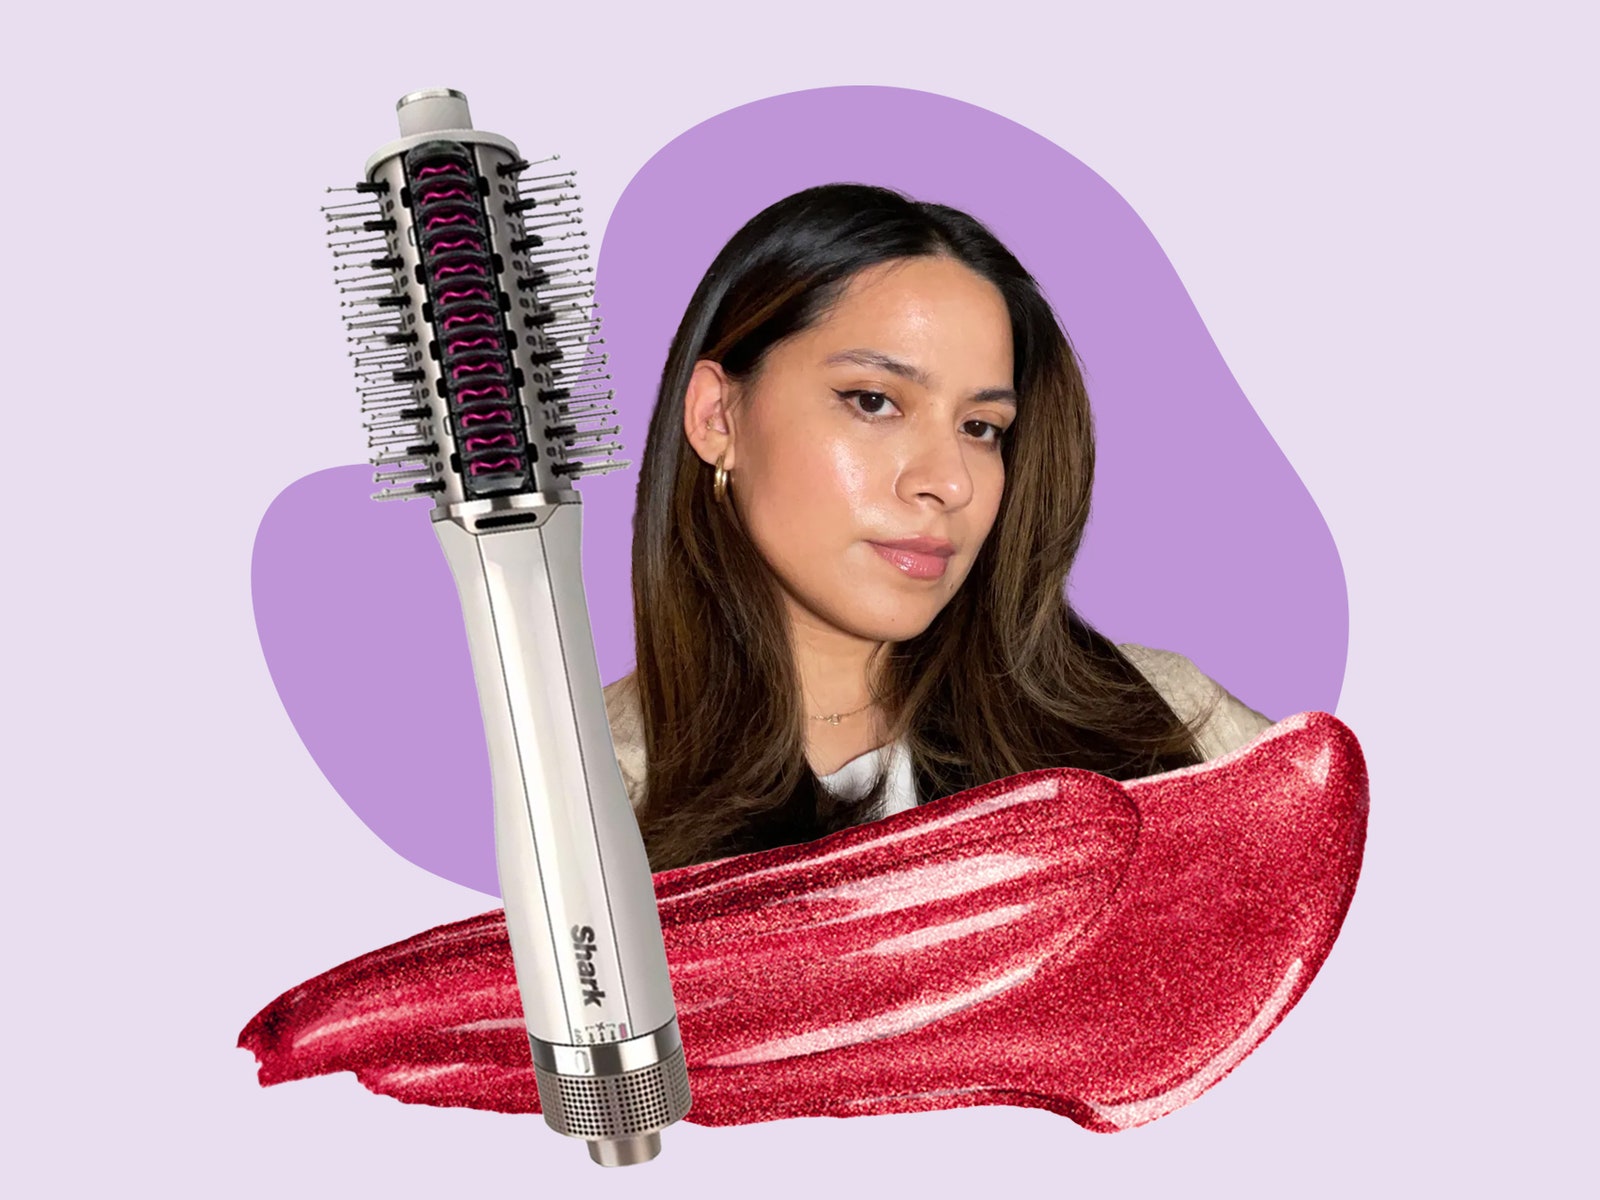 I tried the new Shark Blow-Dryer Brush, and it's a game changer